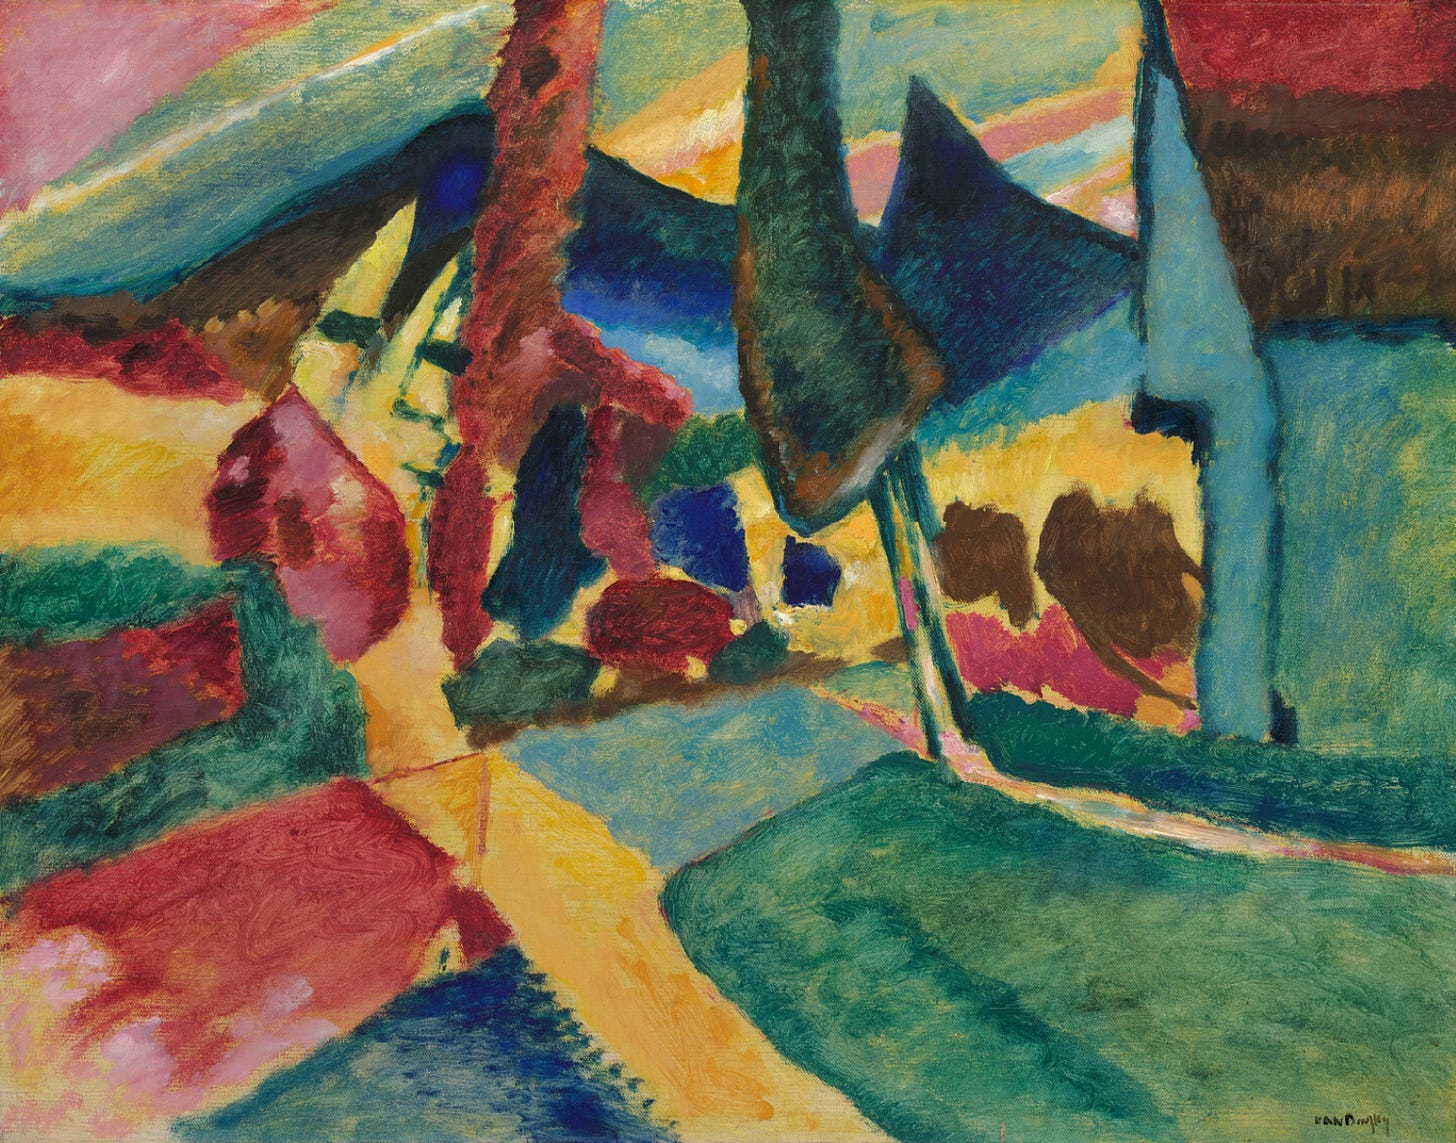 A painting of vibrant colors depicting a natural lanscape with two large trees at its center